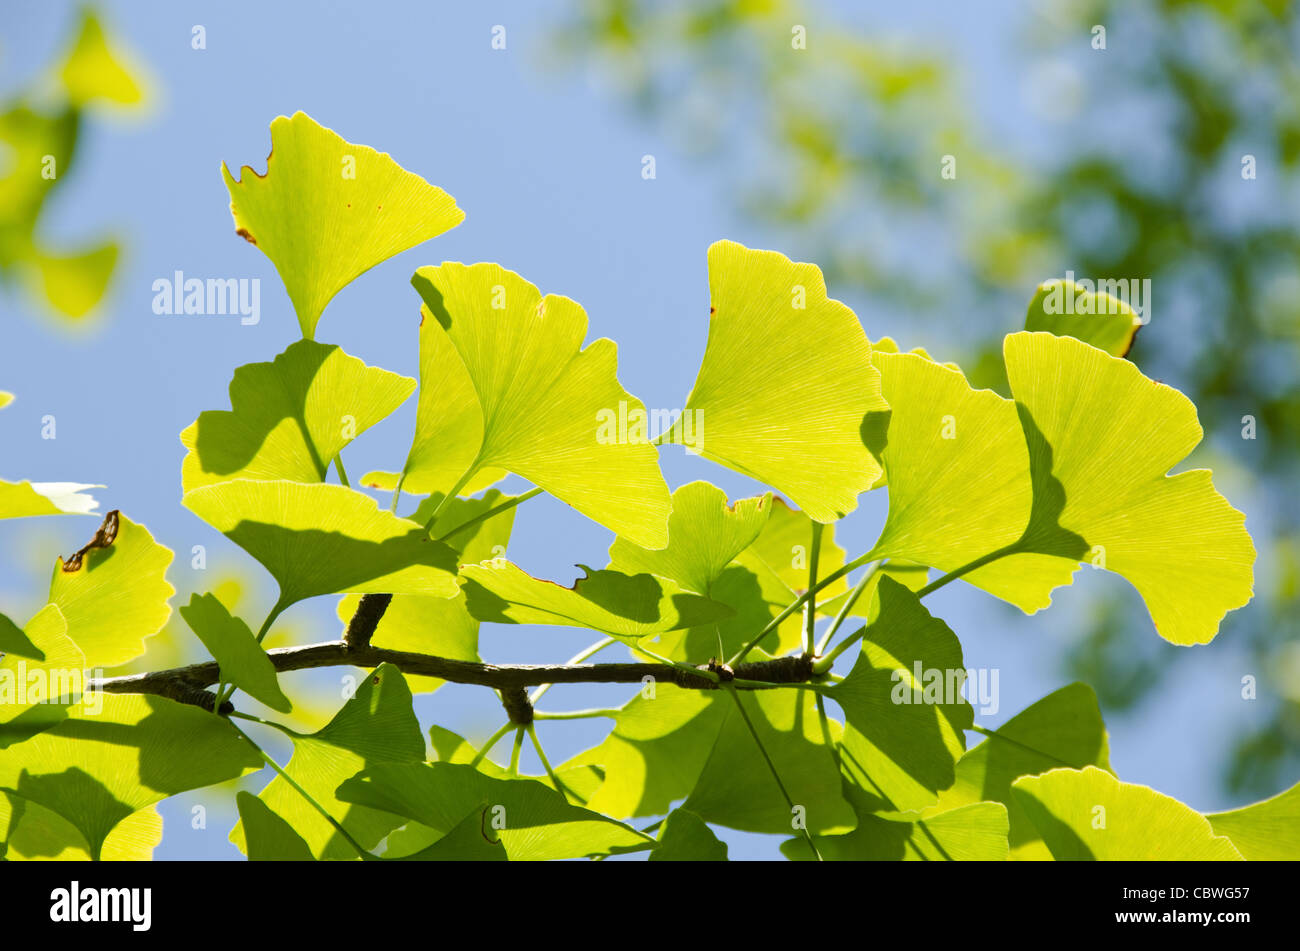 Leaves of Ginkgo biloba on the tree in sunshine with blue sky in background Stock Photo